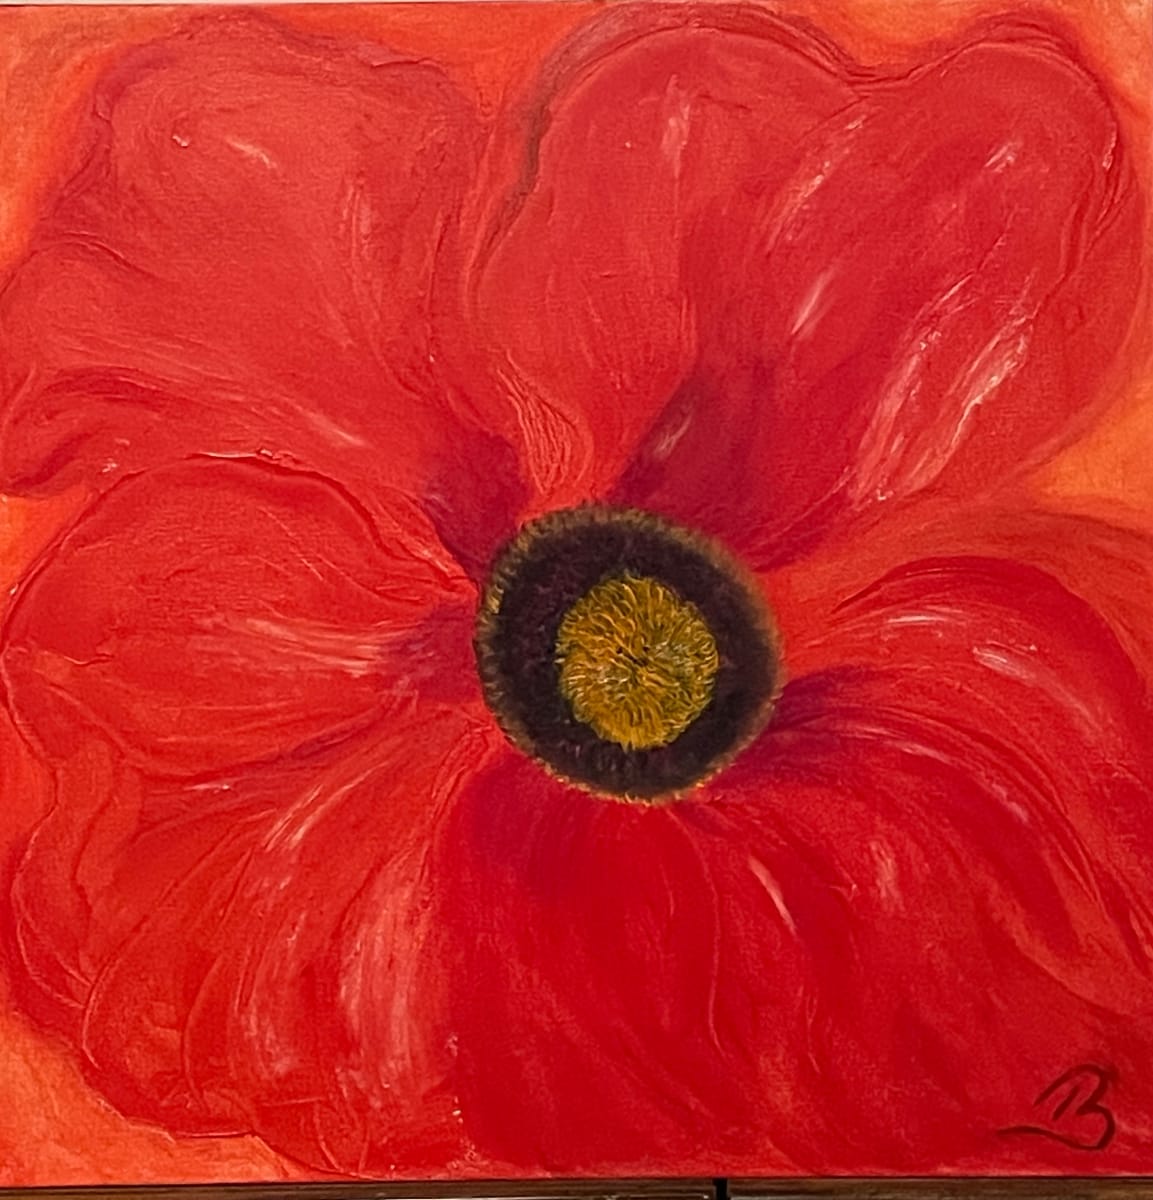 Poppy Series #1 by Beena Cracknell  Image: Compressed jpeg